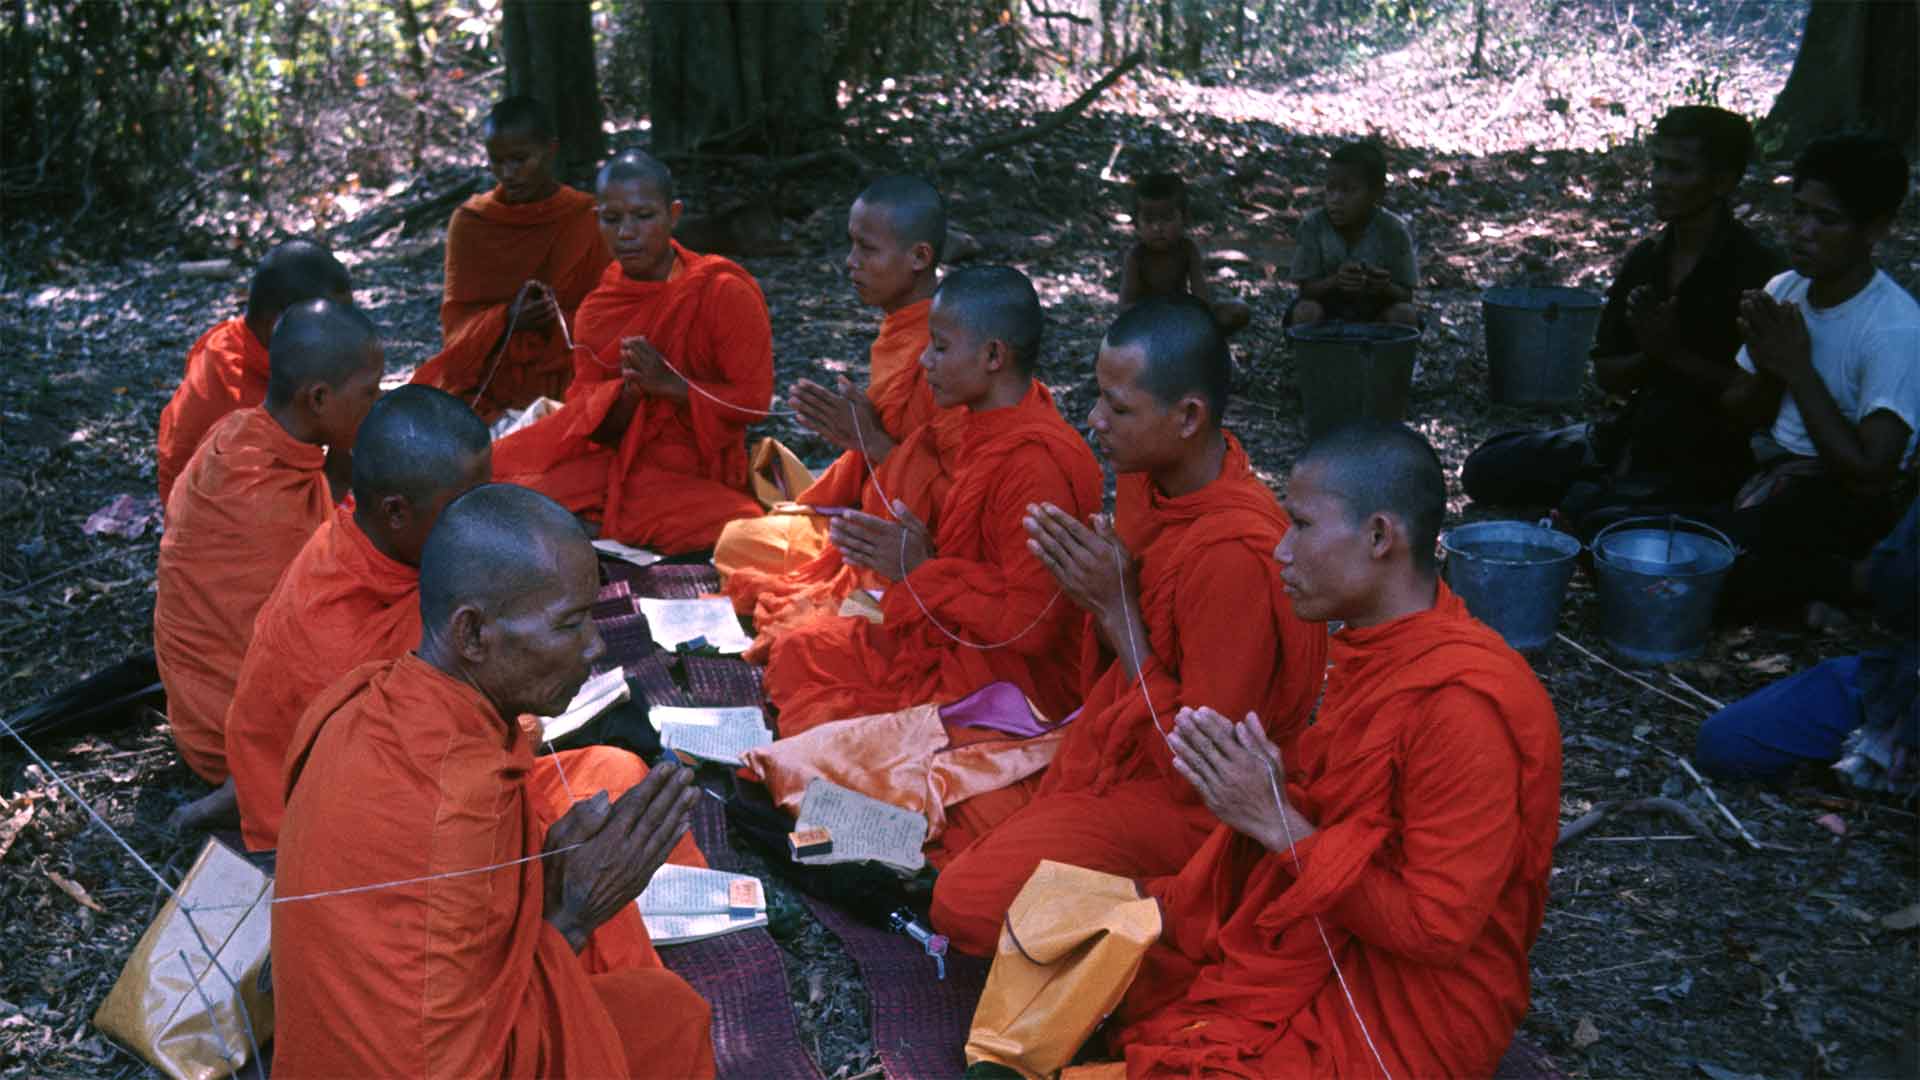 monks praying in clearing, others praying in background